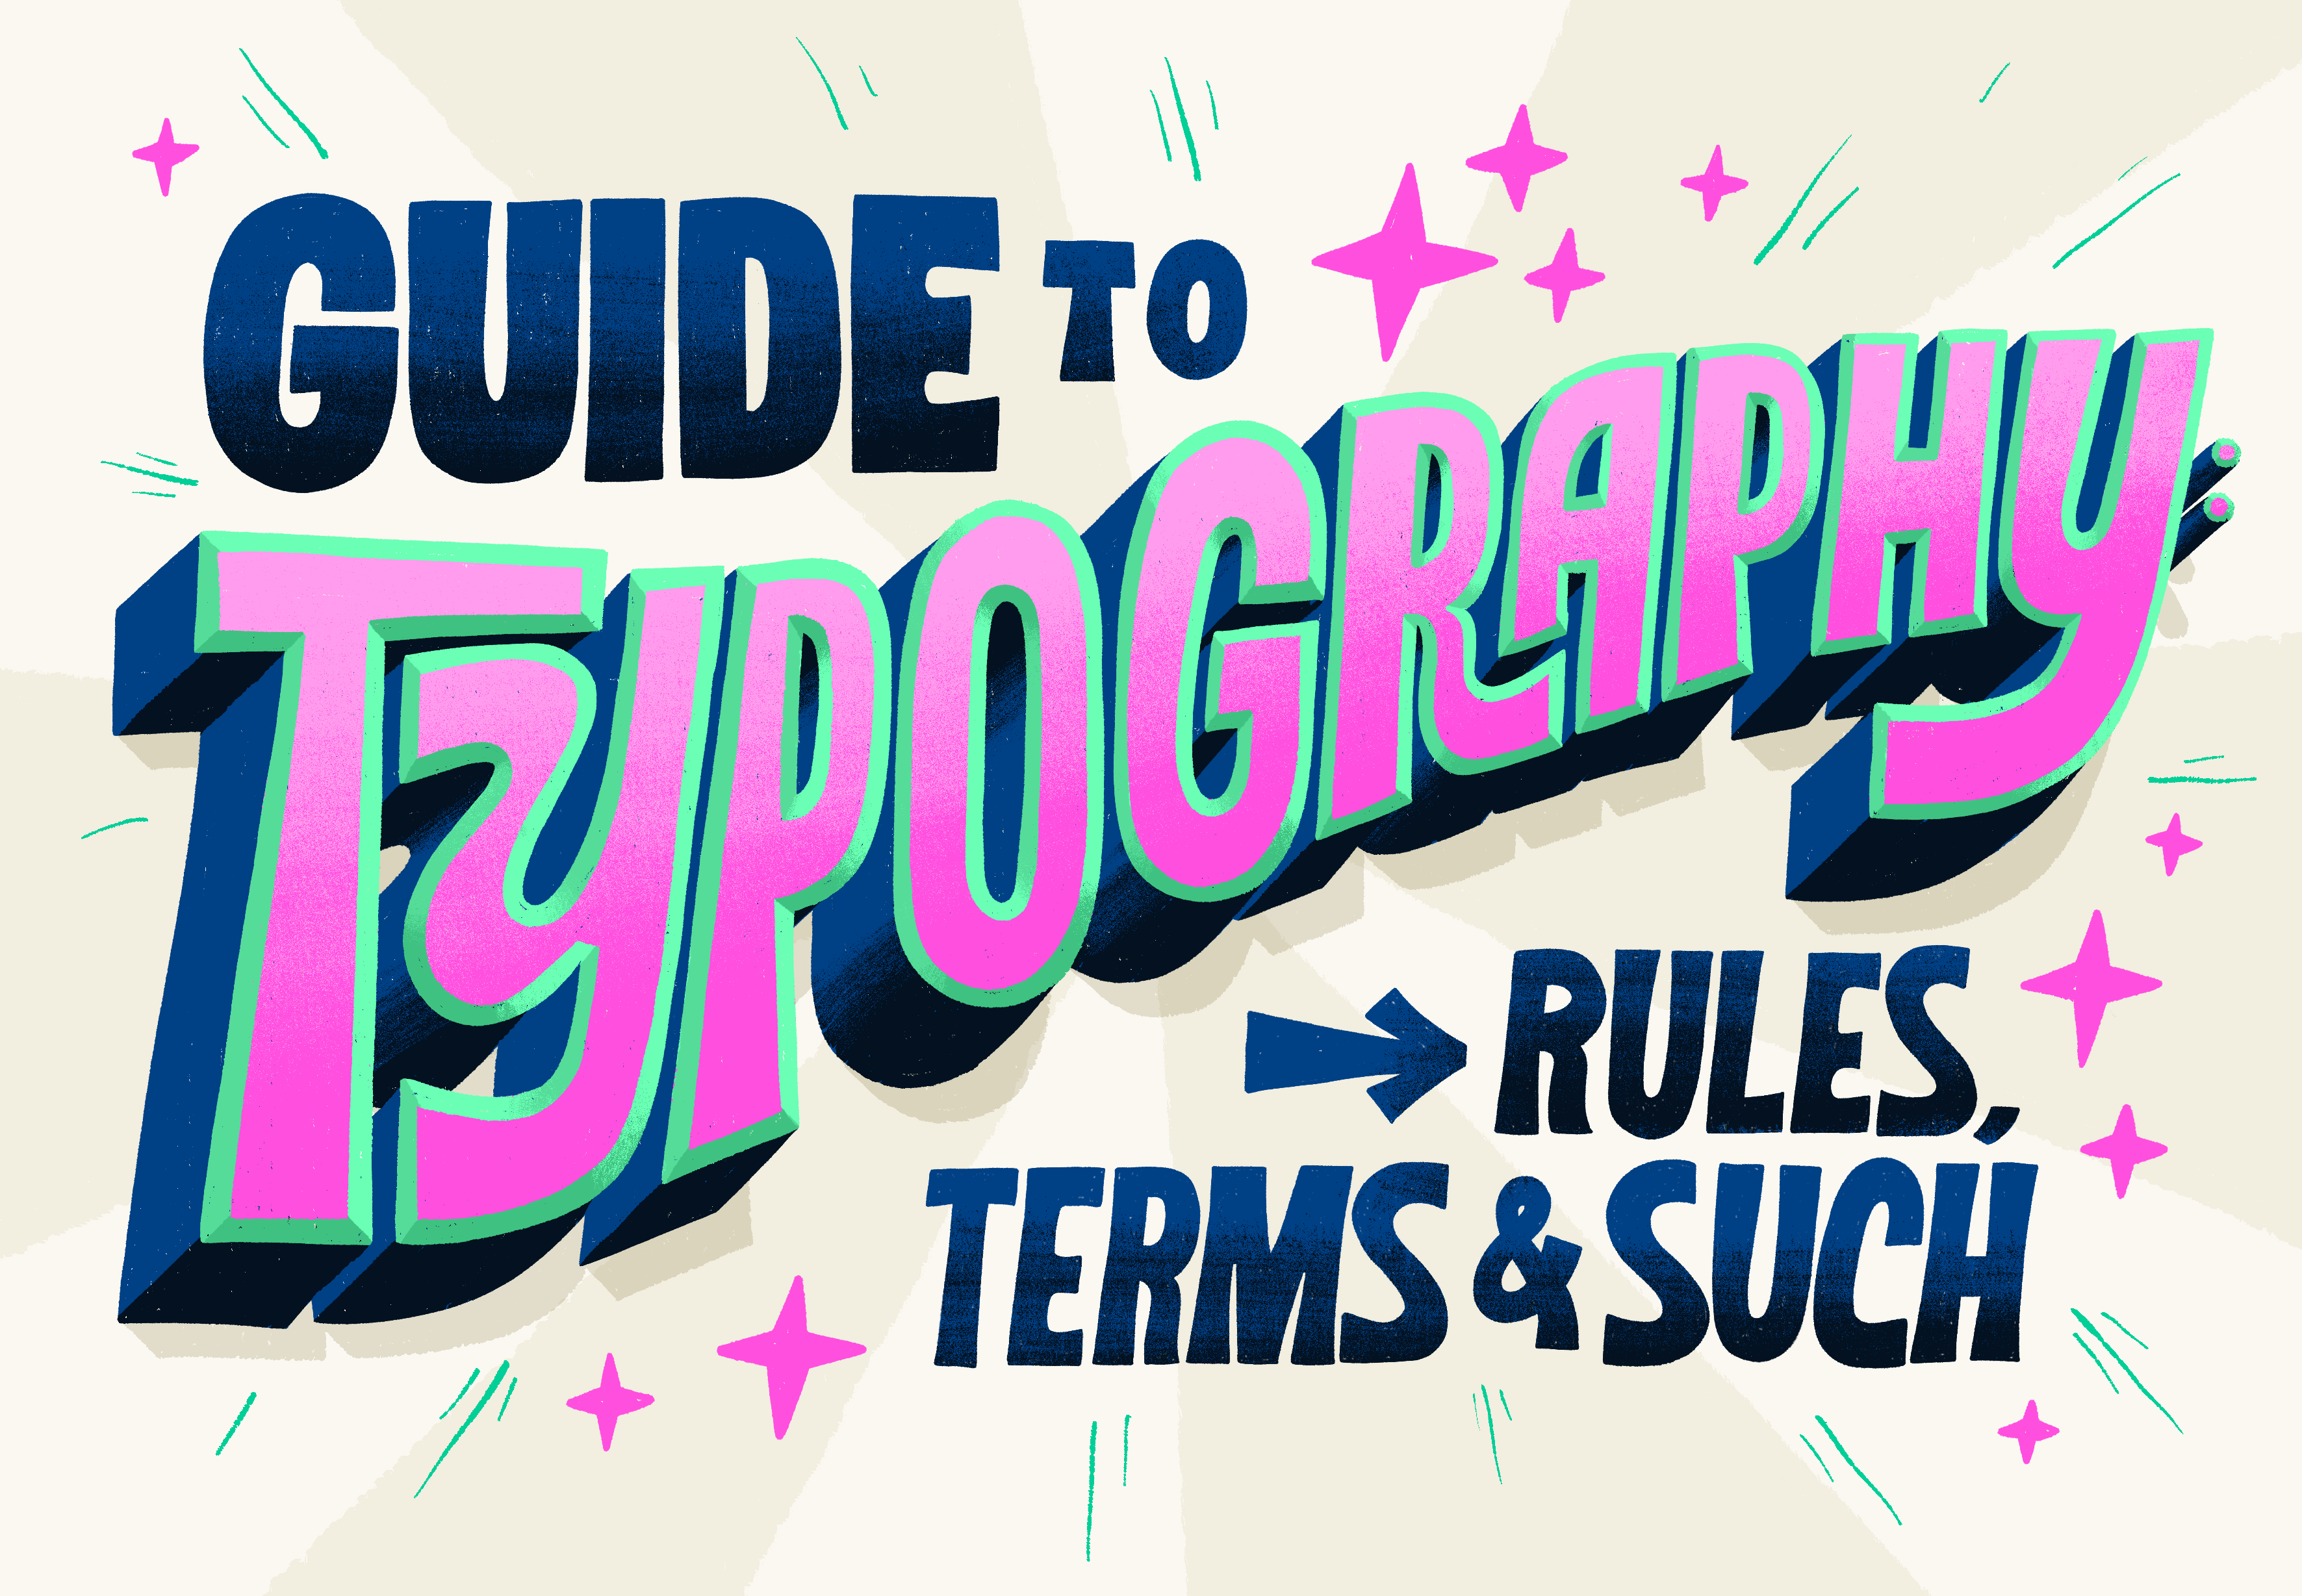 Typography design 101: a guide to rules and terms - 99designs